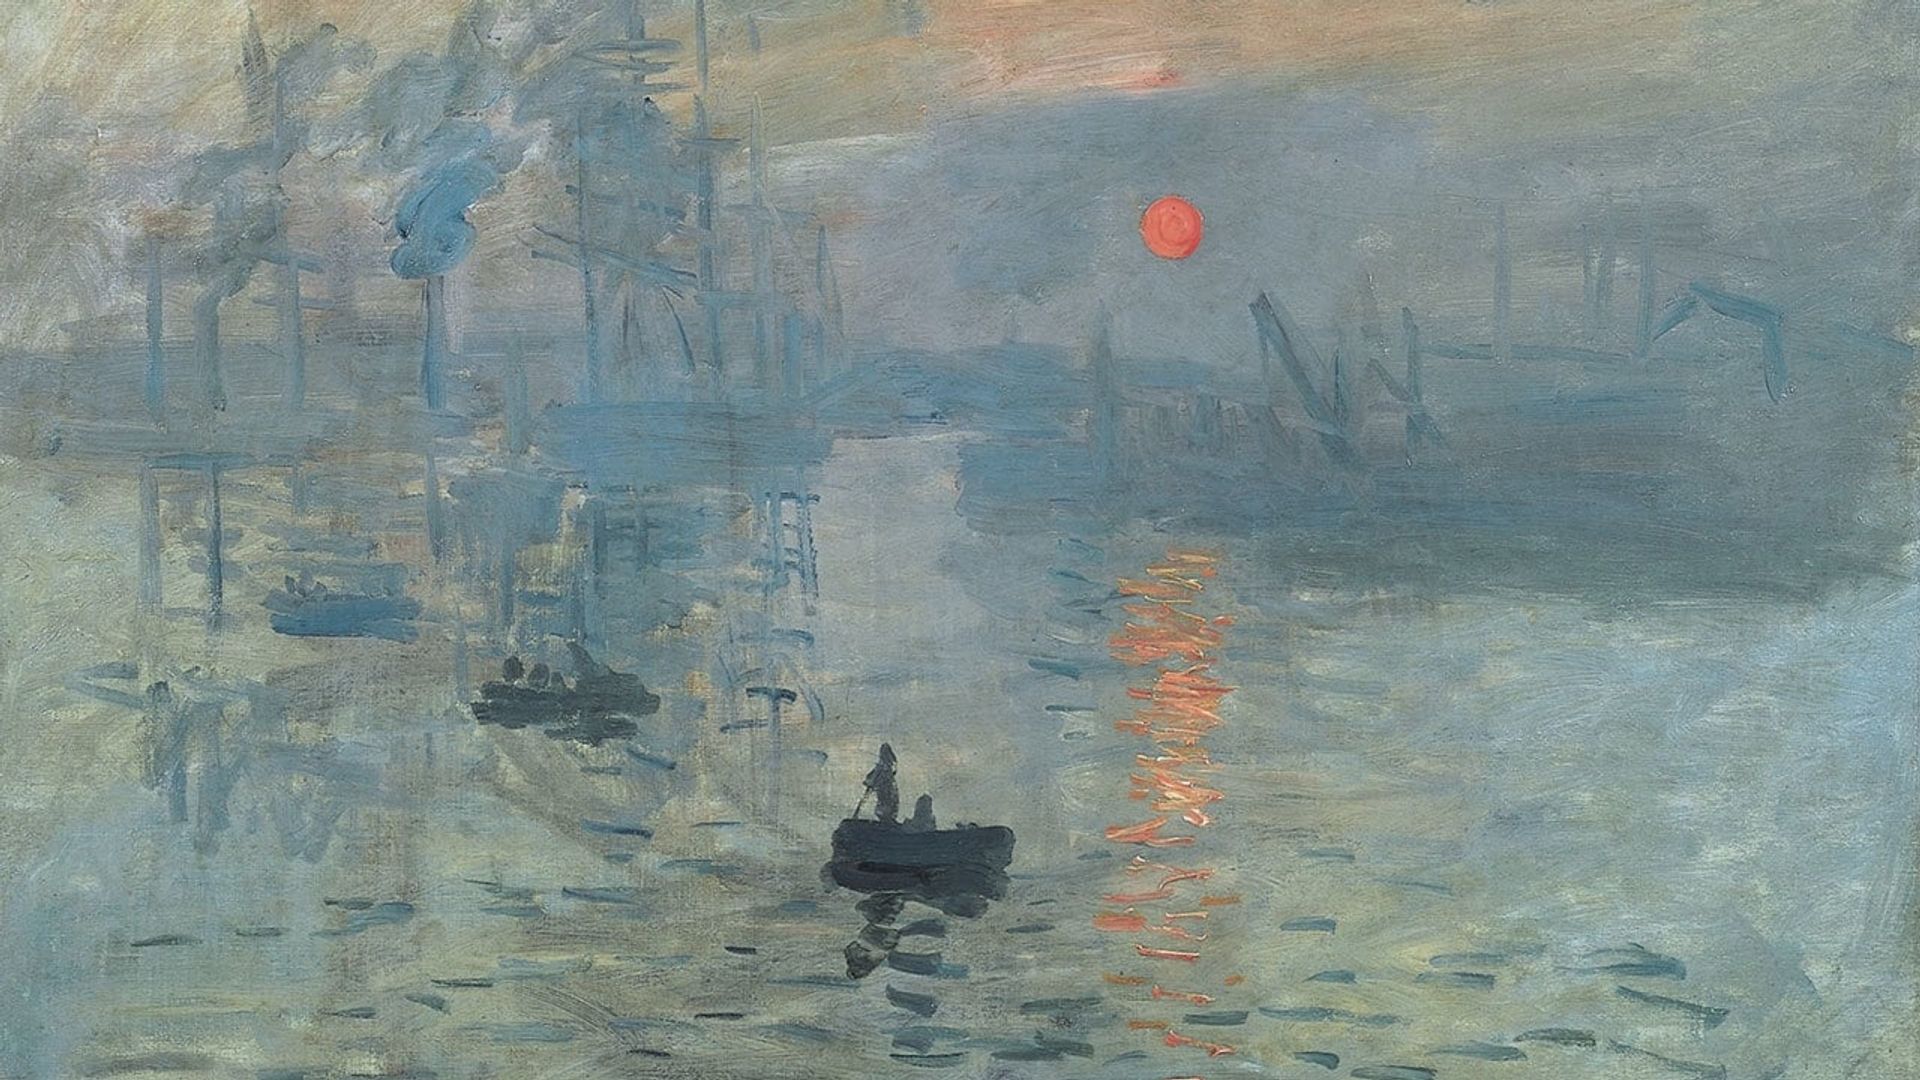 Exhibition on Screen: I, Claude Monet background